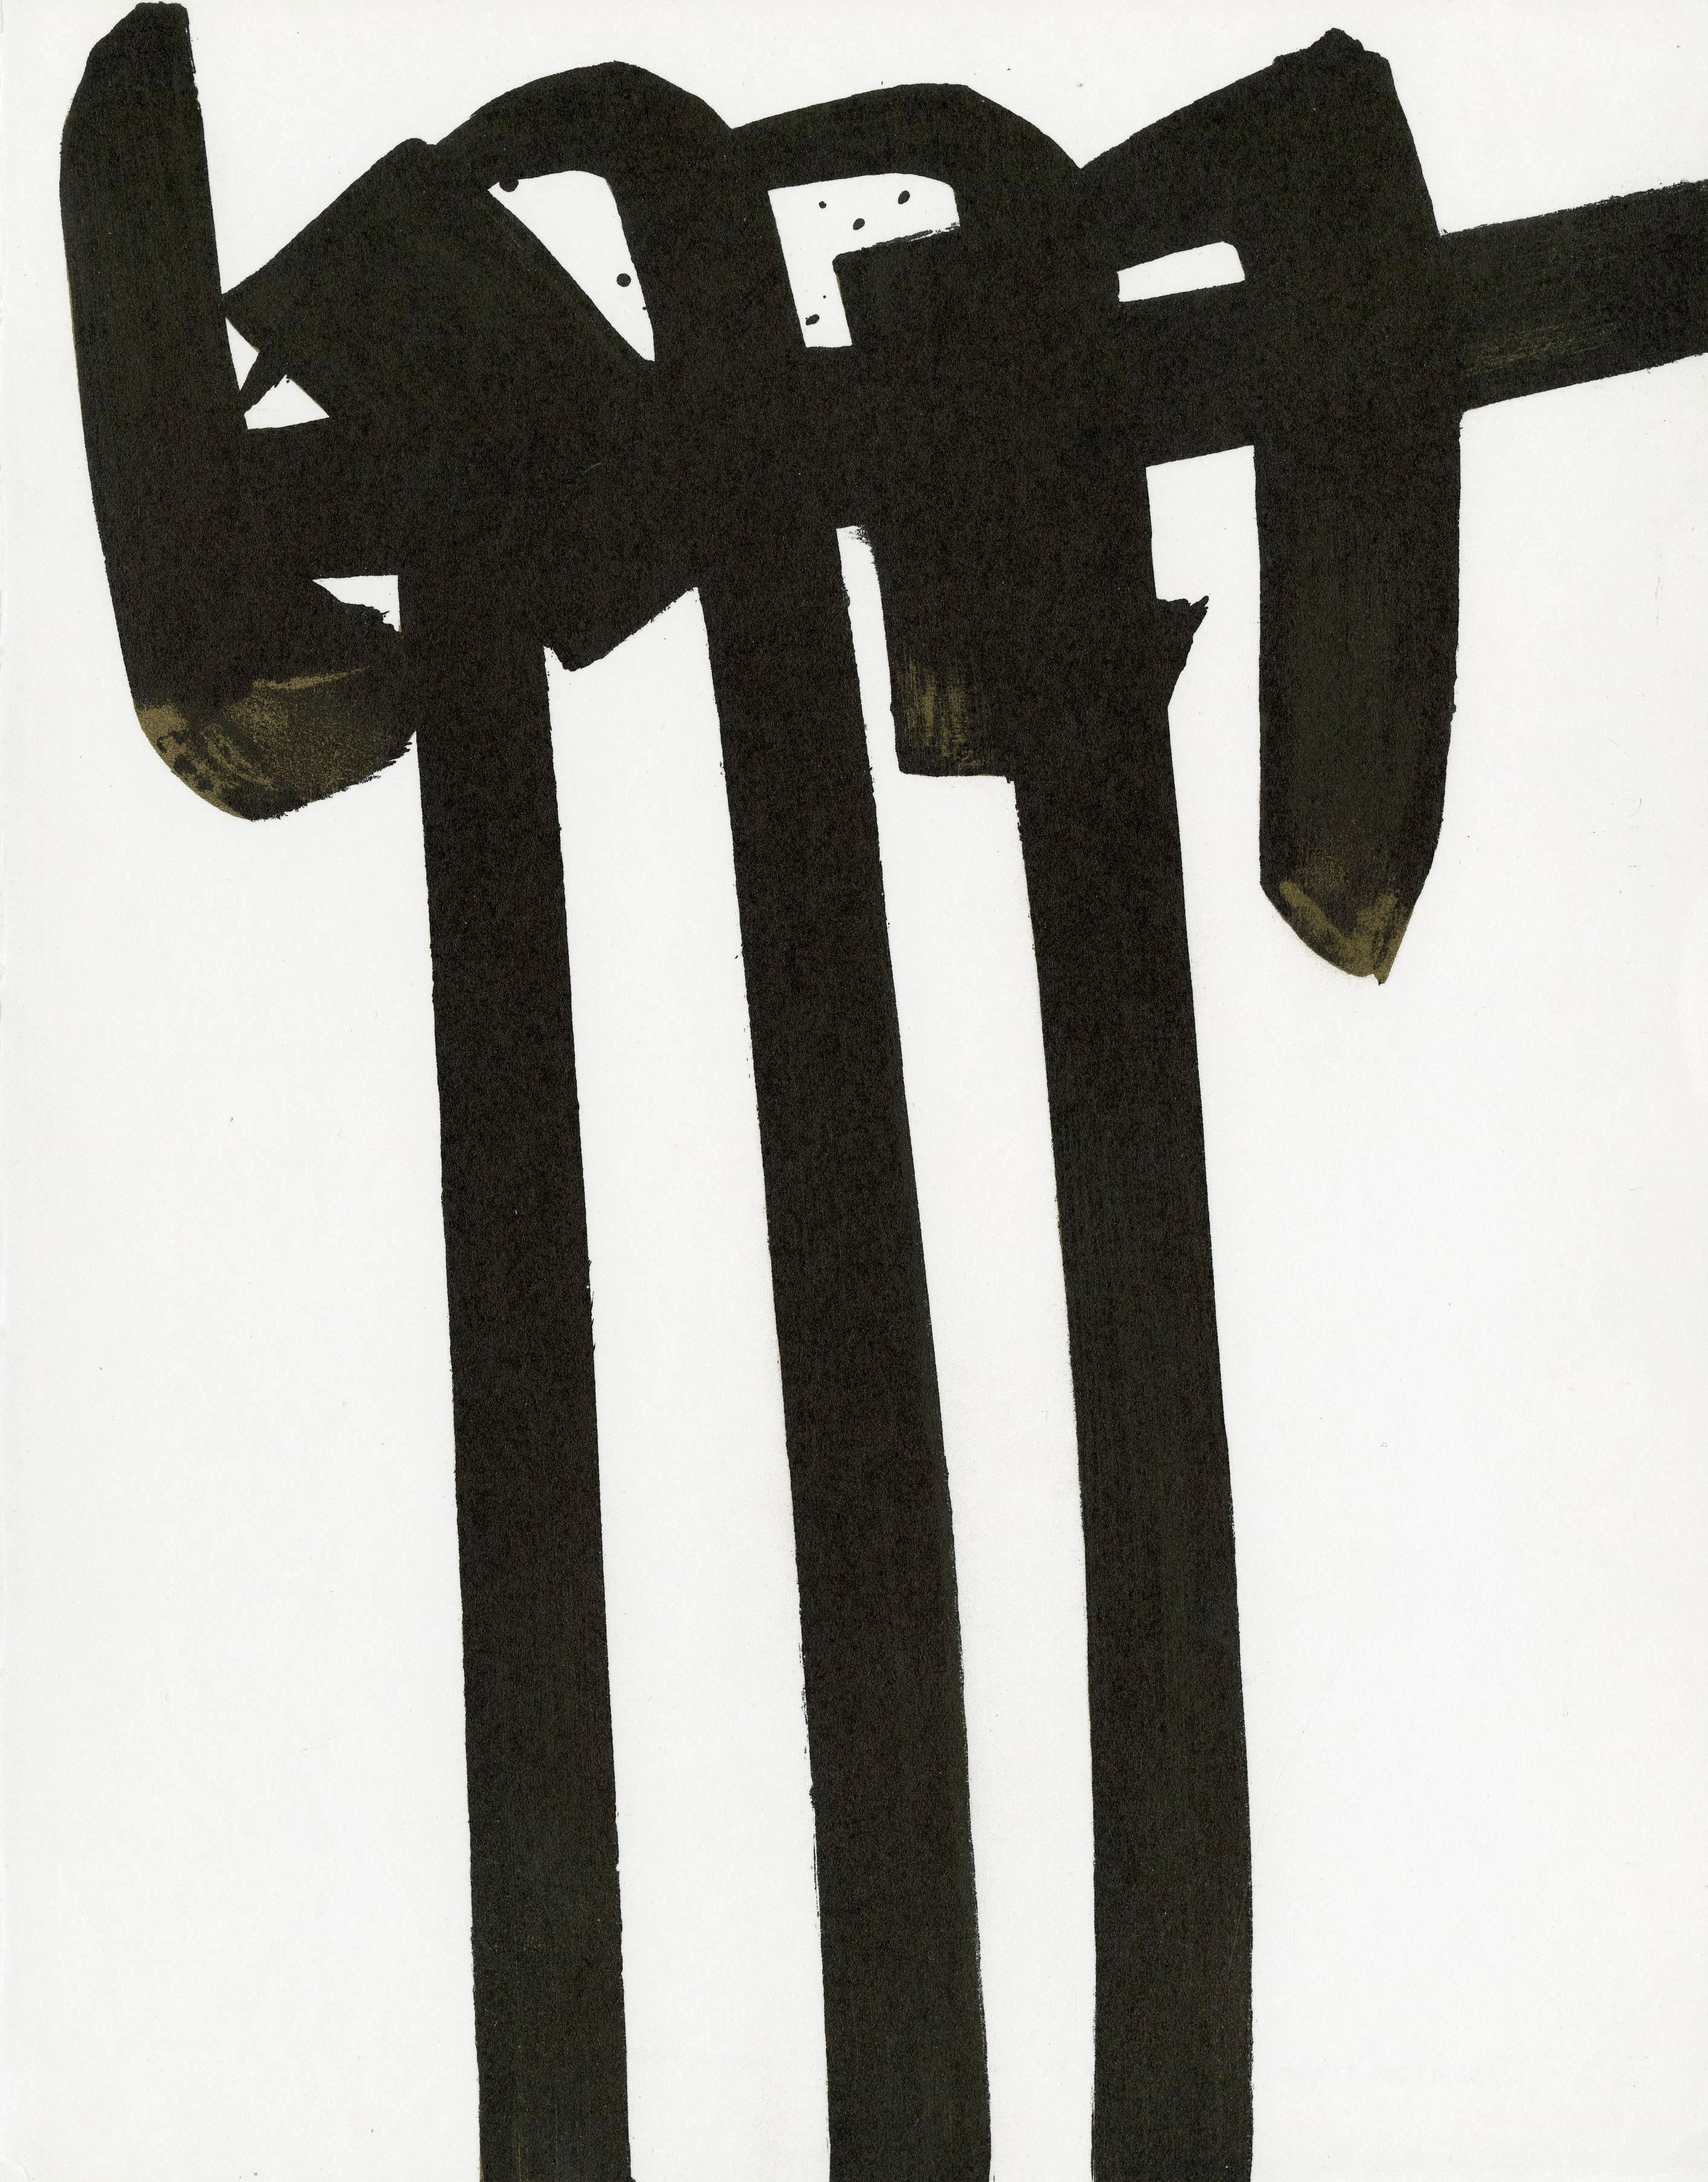 Pierre Soulages Abstract Print - "Illustration Siecles No. 34" 1970